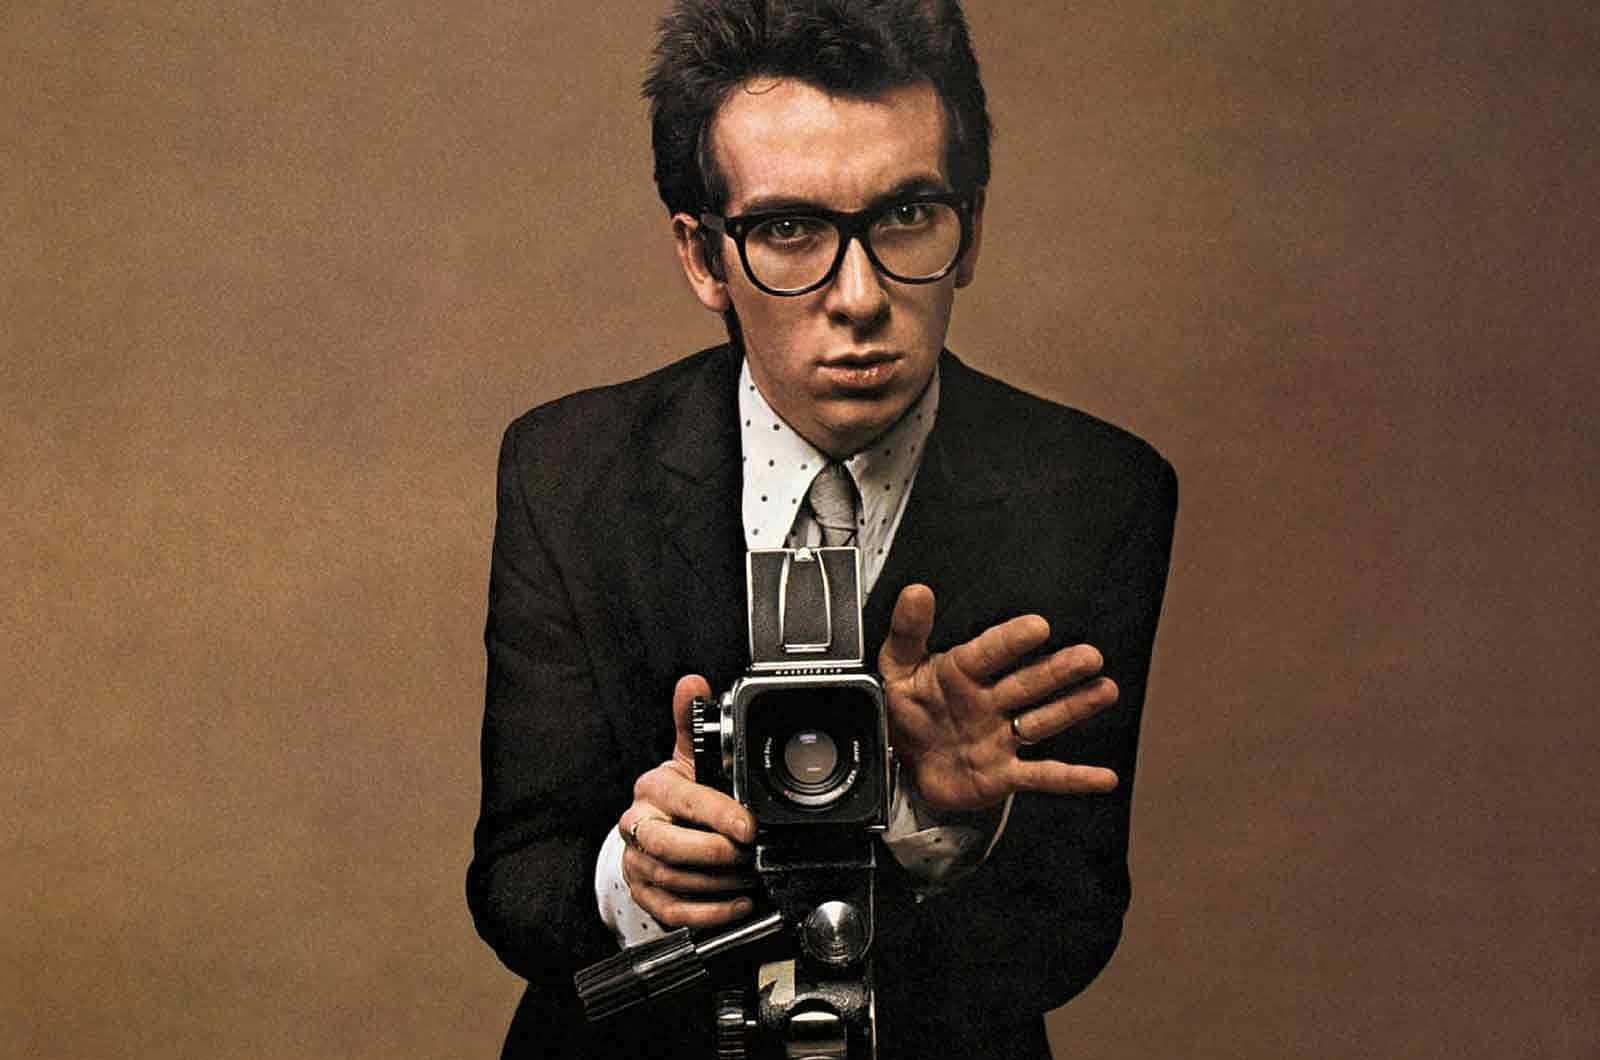 Elvis Costello With A Vintage Camera Wallpaper